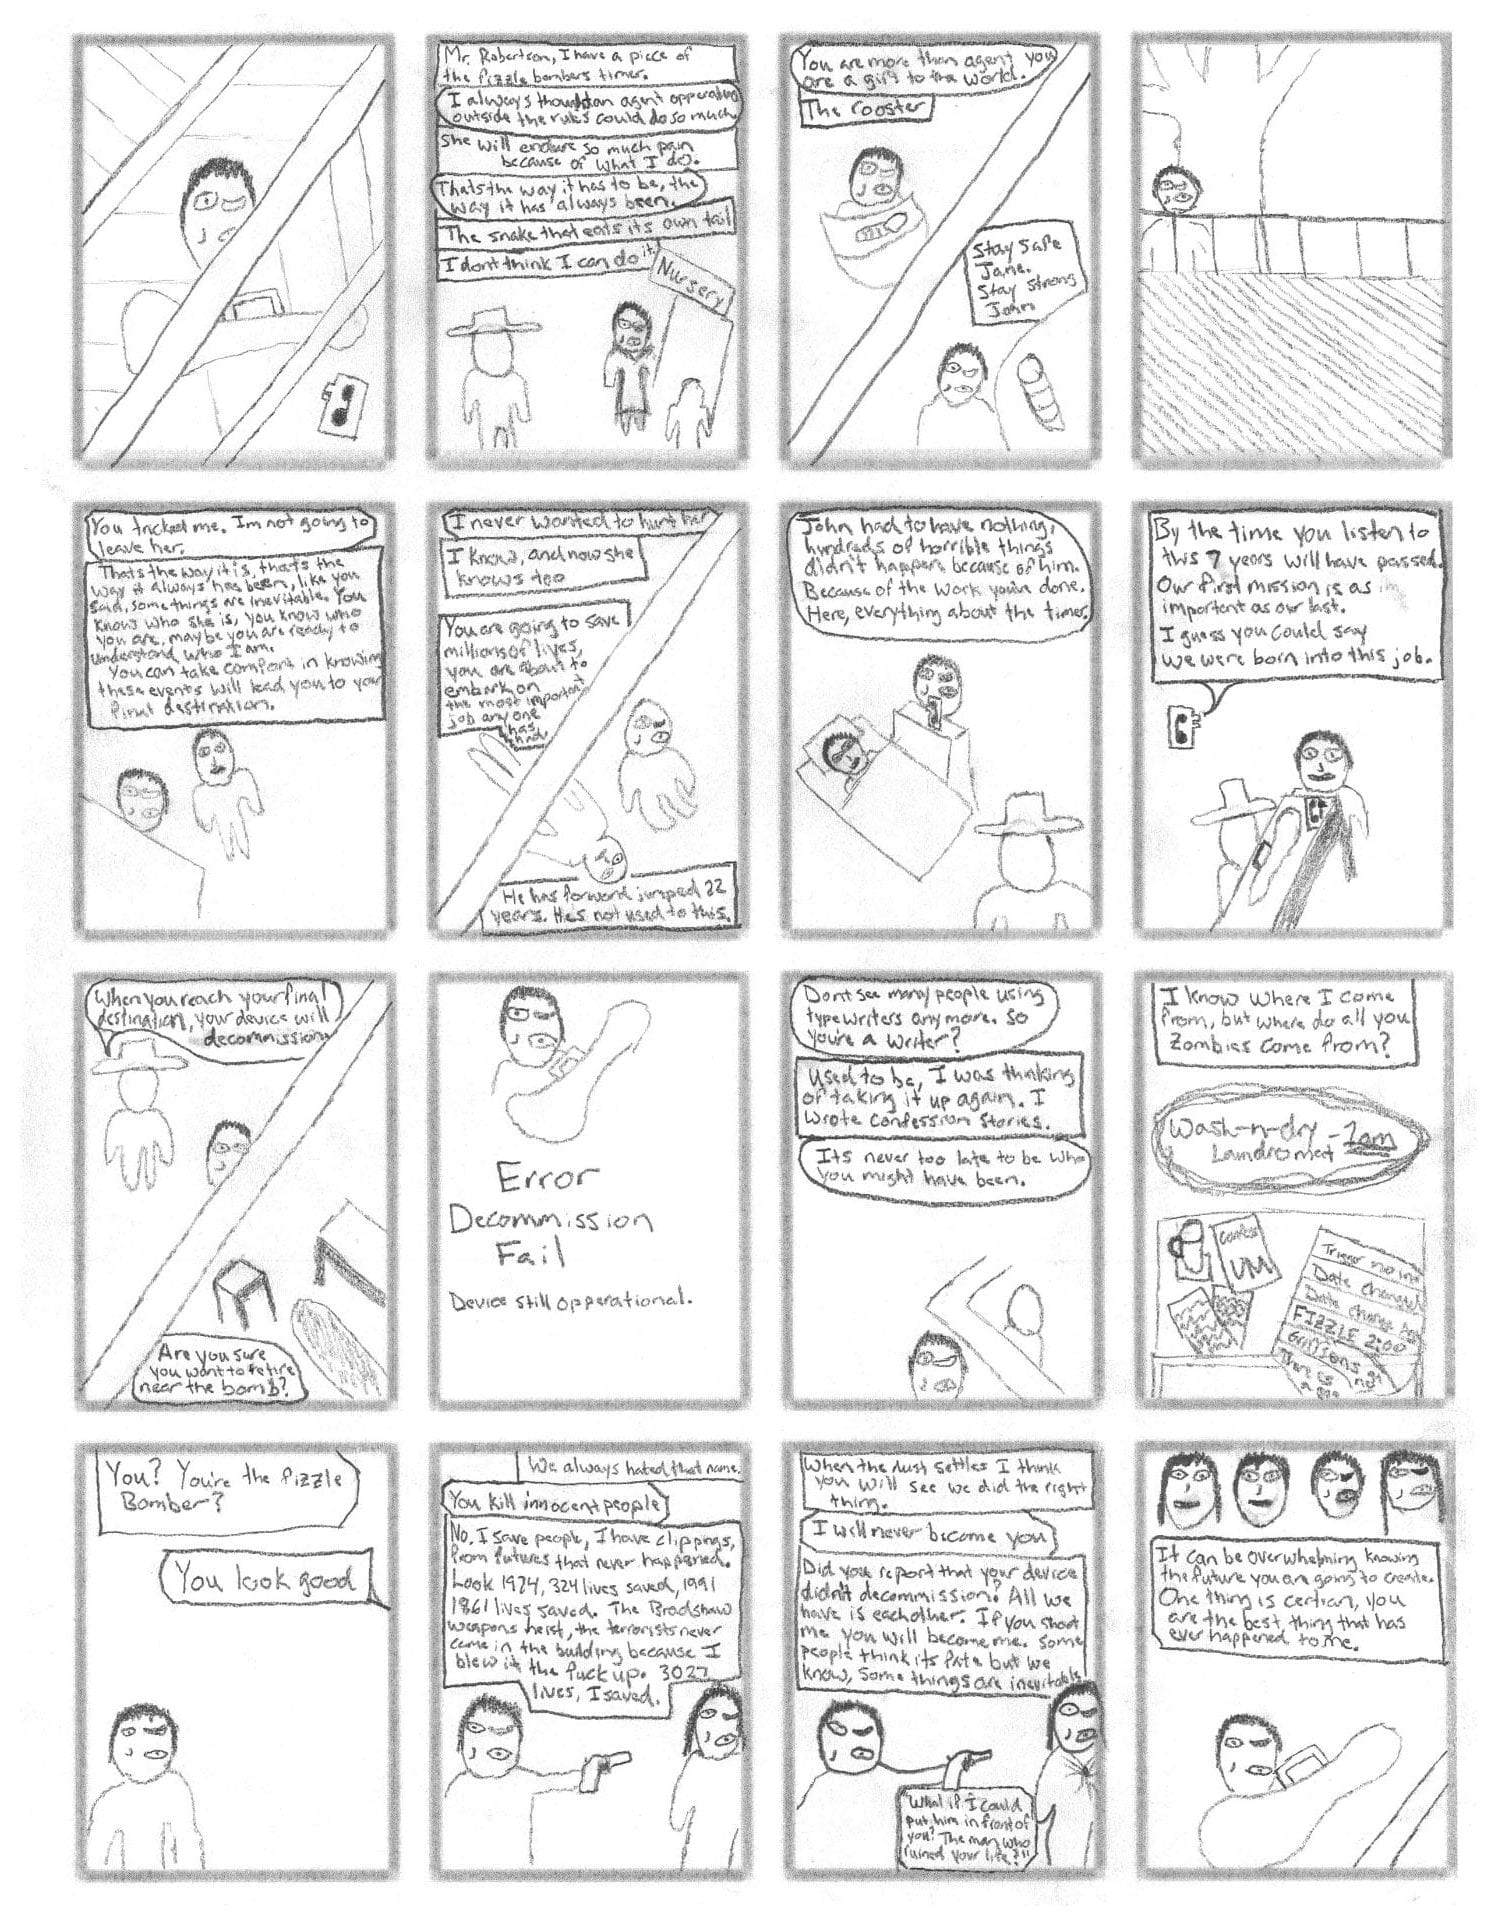 D. Wilen - Comic Page 4 - We see the different versions of the narrator congregate and converse, and we meet the child again.